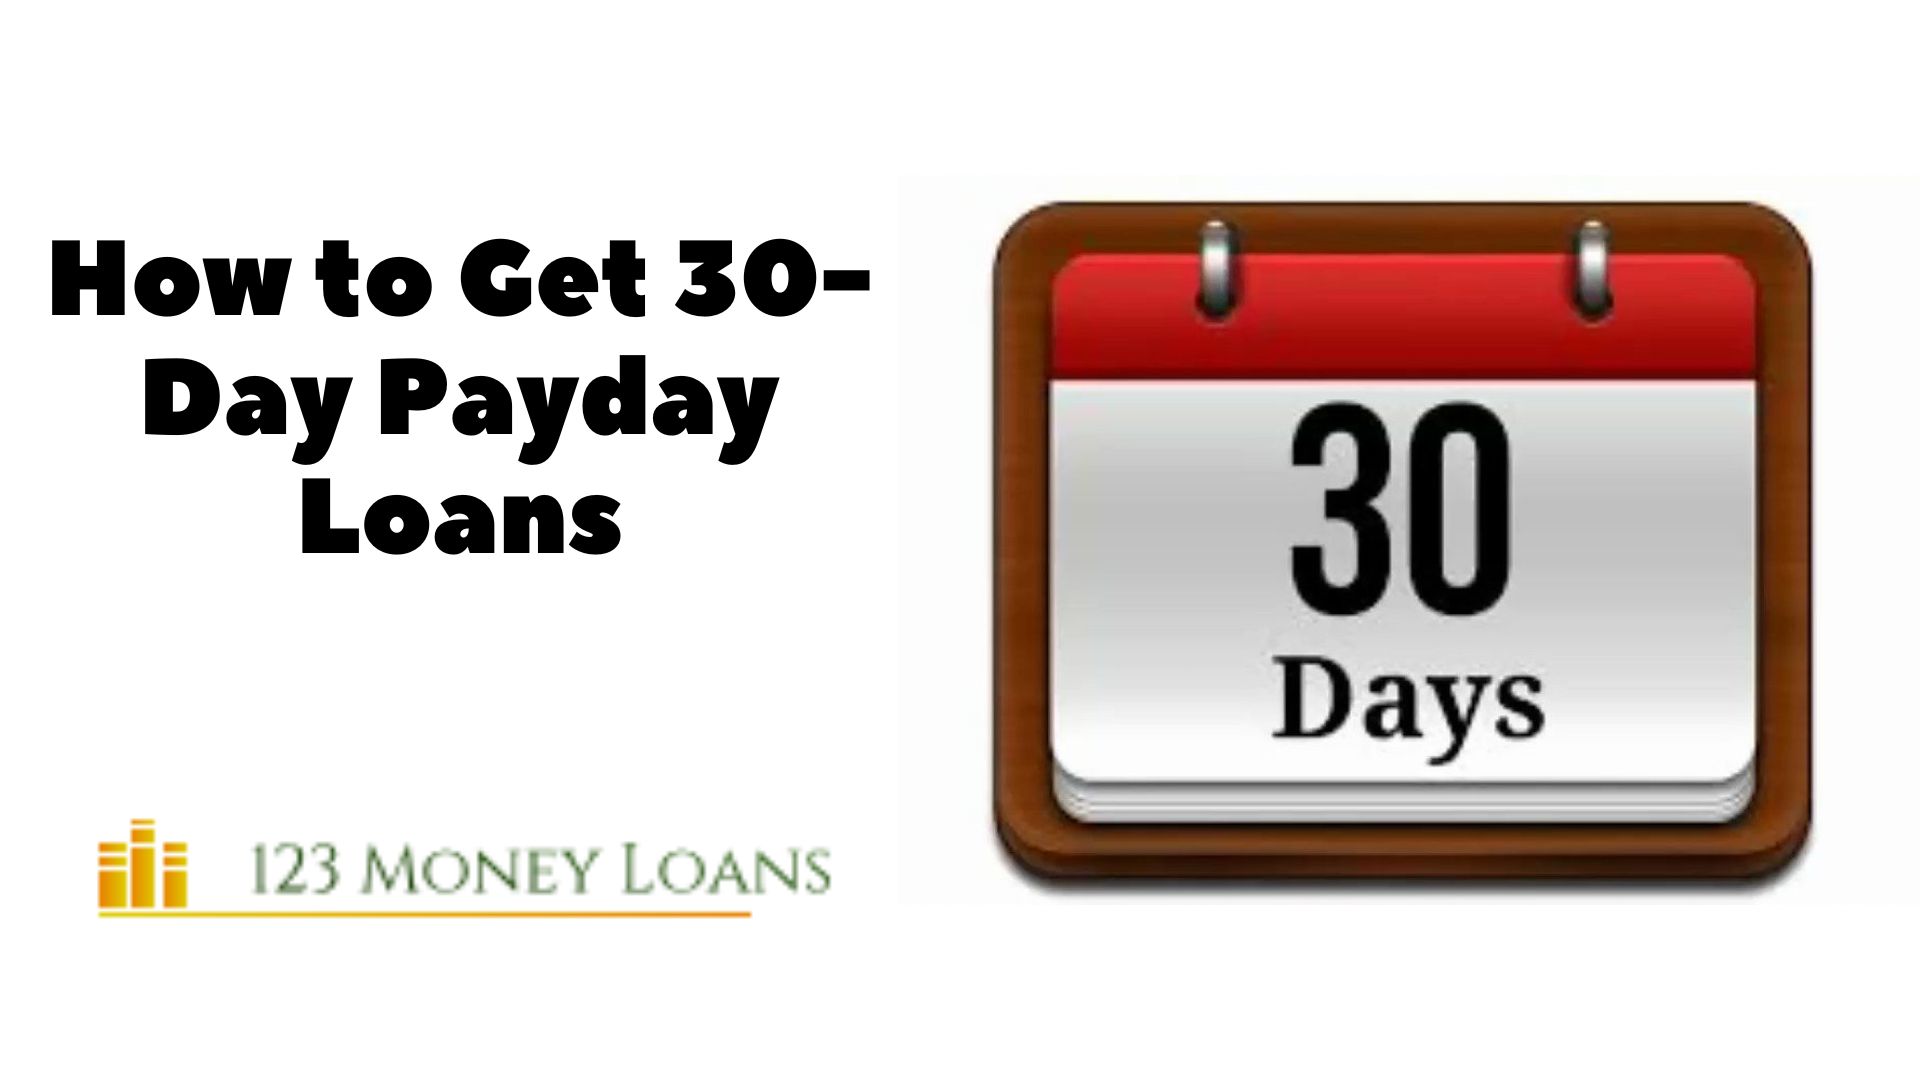 How to Get 30-Day Payday Loans